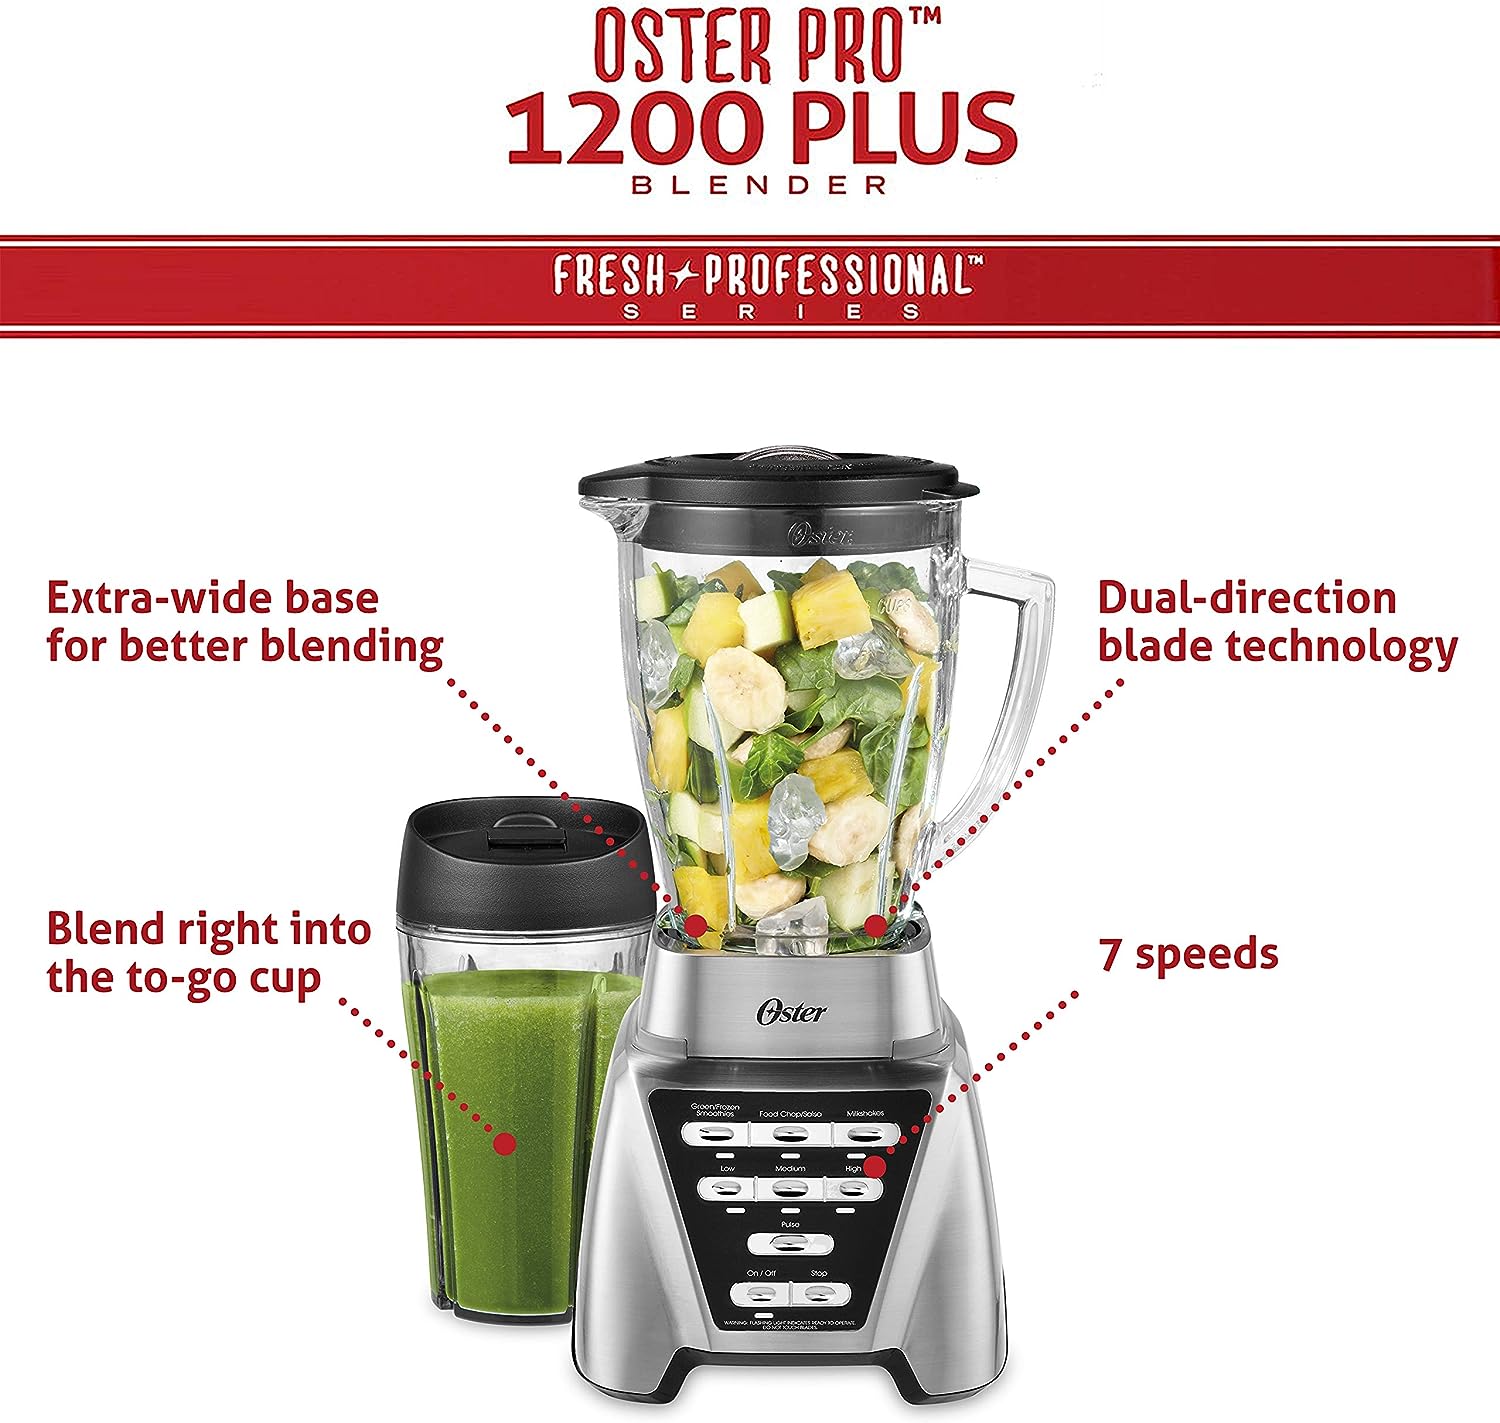 Oster 3-in-1 Blender and Food Processor System with 1200-Watt